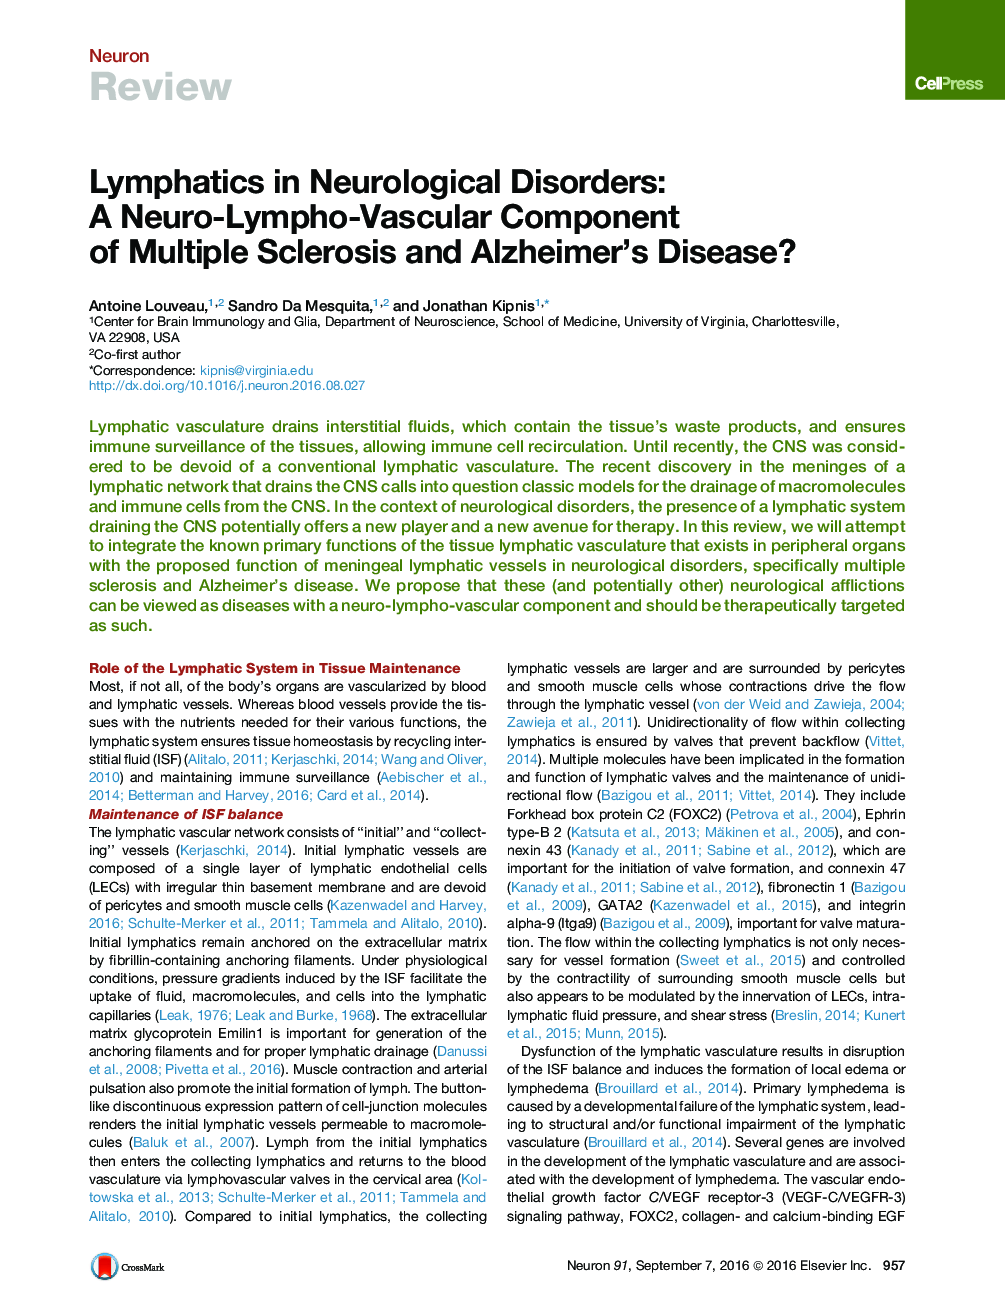 Lymphatics in Neurological Disorders: A Neuro-Lympho-Vascular Component of Multiple Sclerosis and Alzheimer’s Disease?